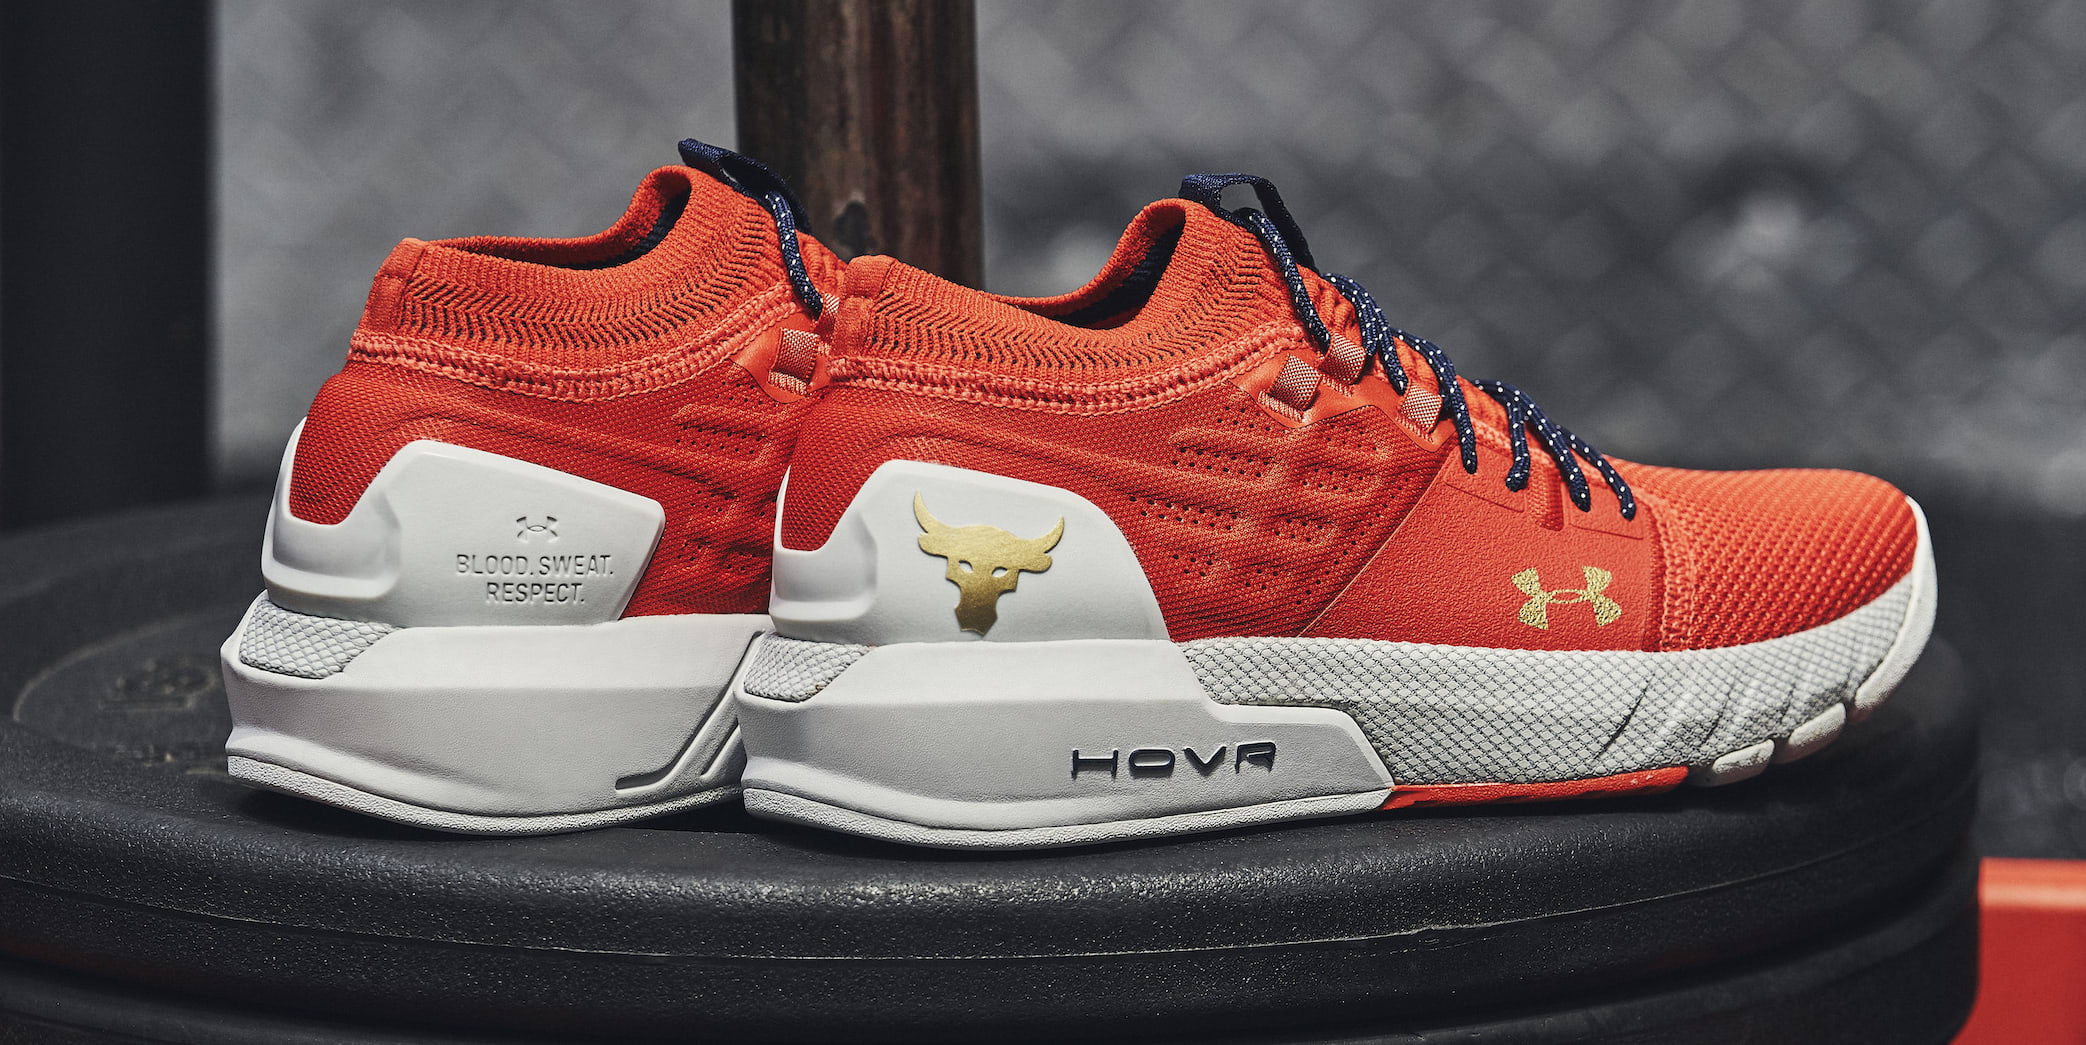 under armour blood sweat respect shoes 